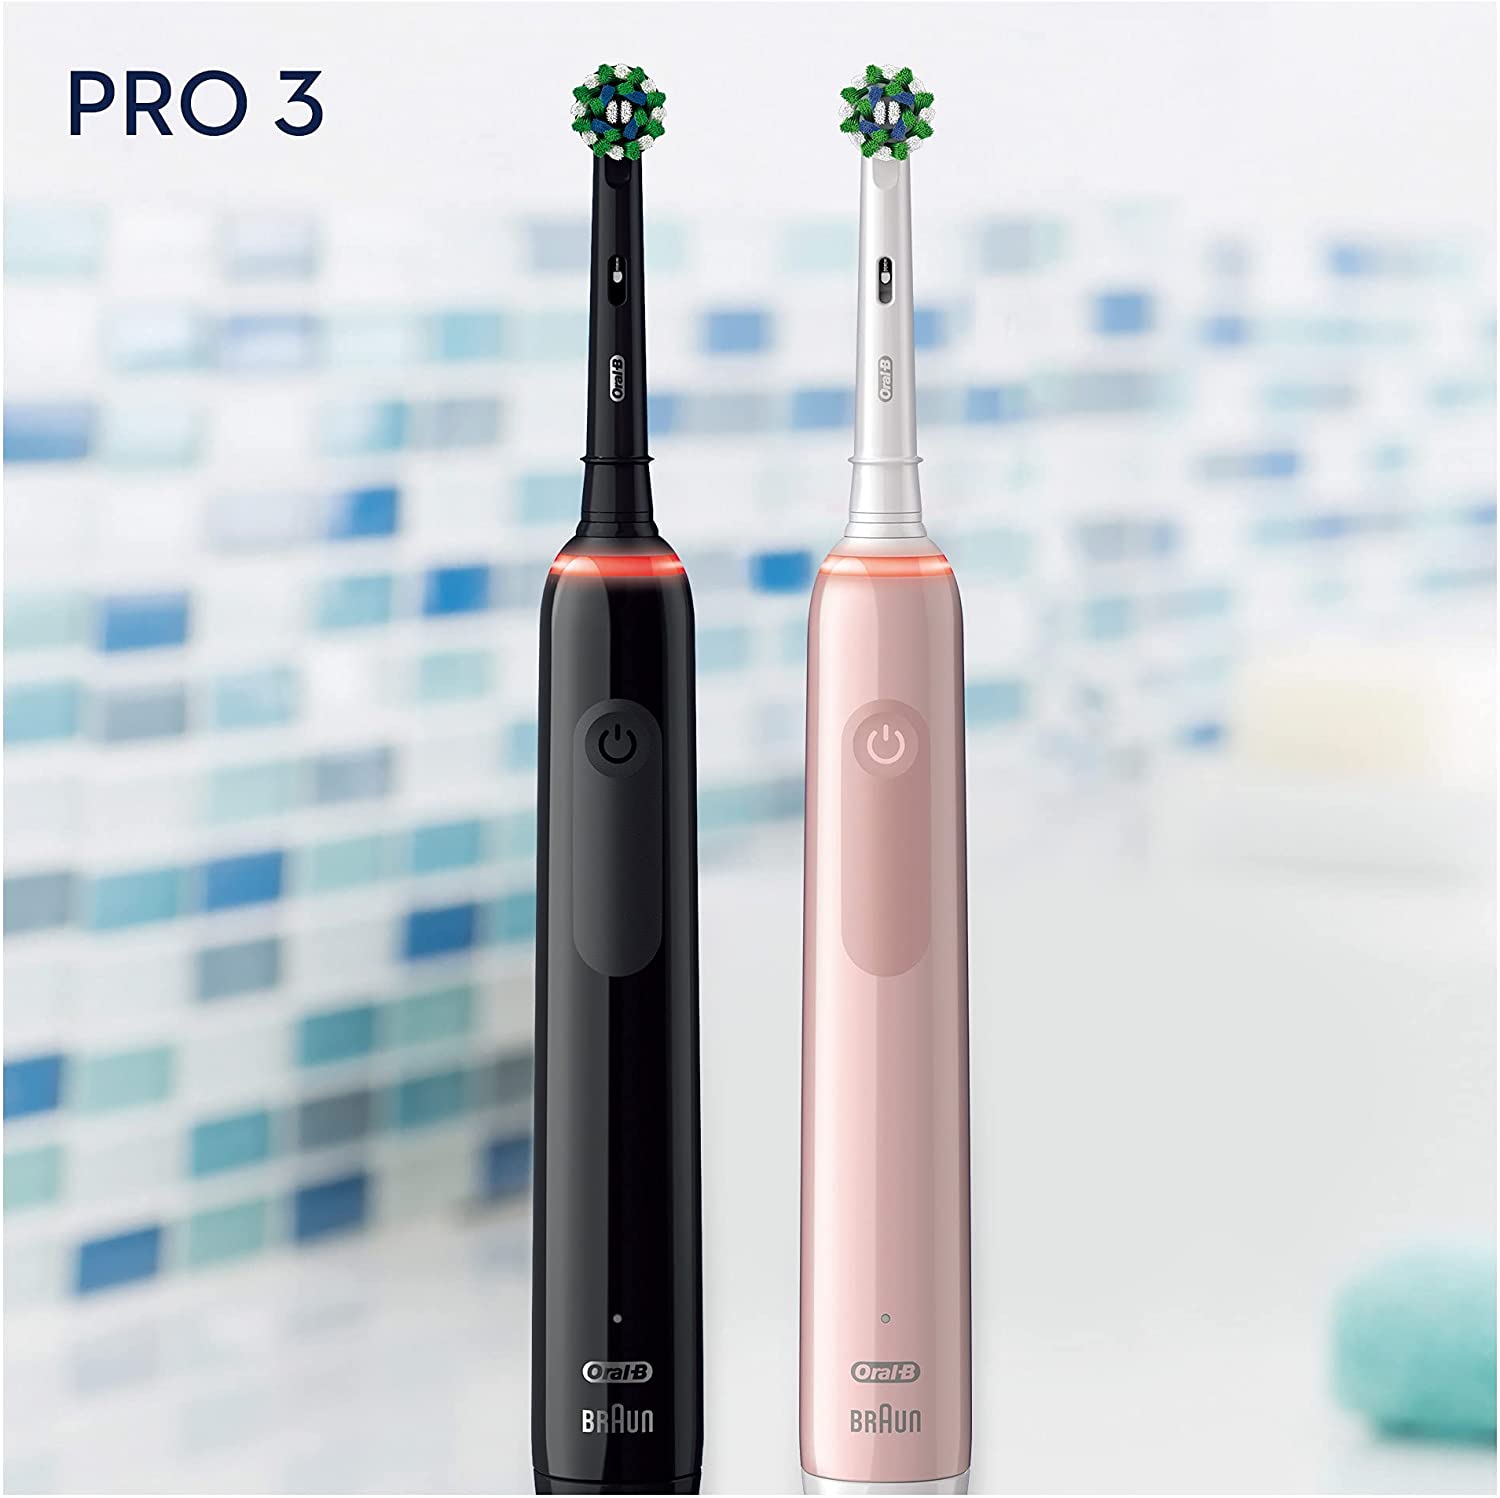 Oral-B Pro 3 - 3900 - Set of 2 Electric Toothbrushes Pink & Black, 2 Handles with Visible Pressure Sensor, 2 Toothbrush Heads - Healthxpress.ie